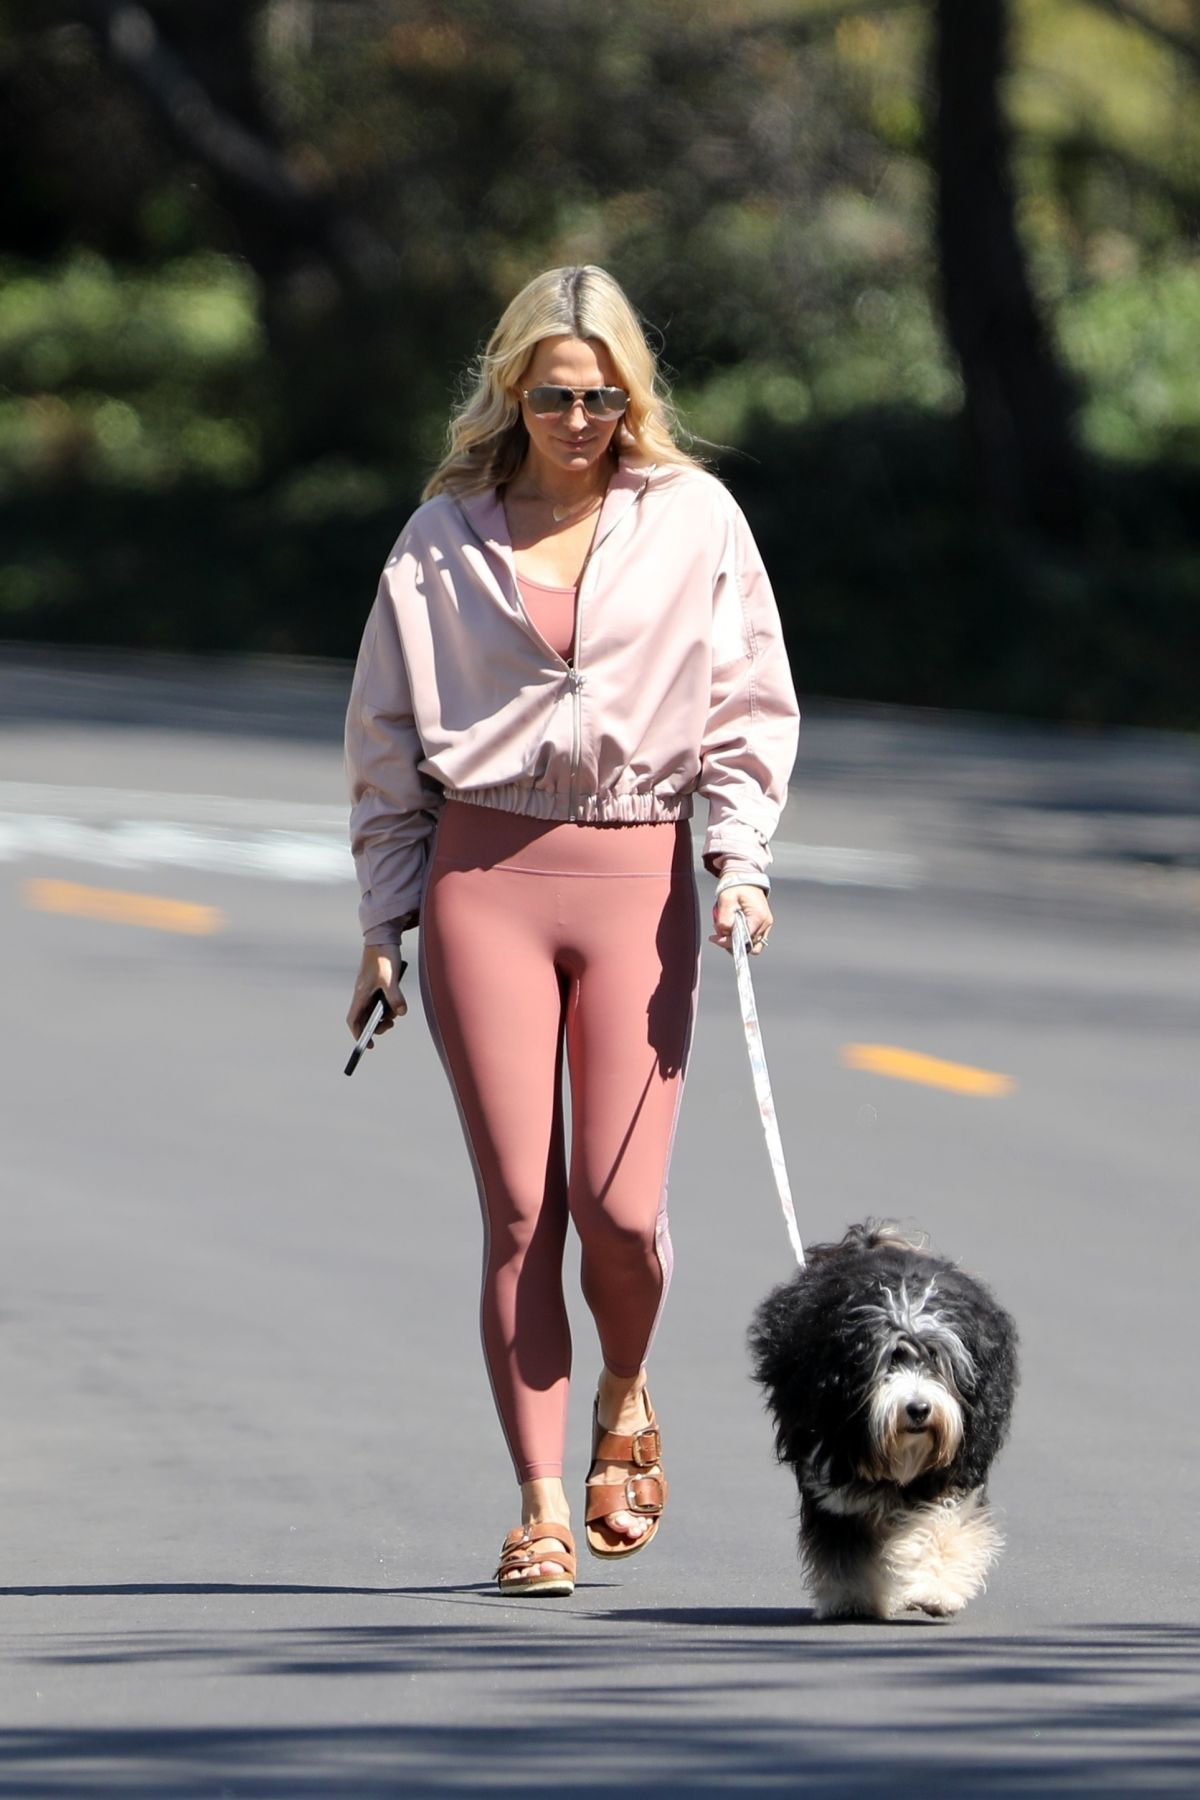 molly-sims-out-with-her-dog-in-pacific-palisades-03-18-2021-2.jpg